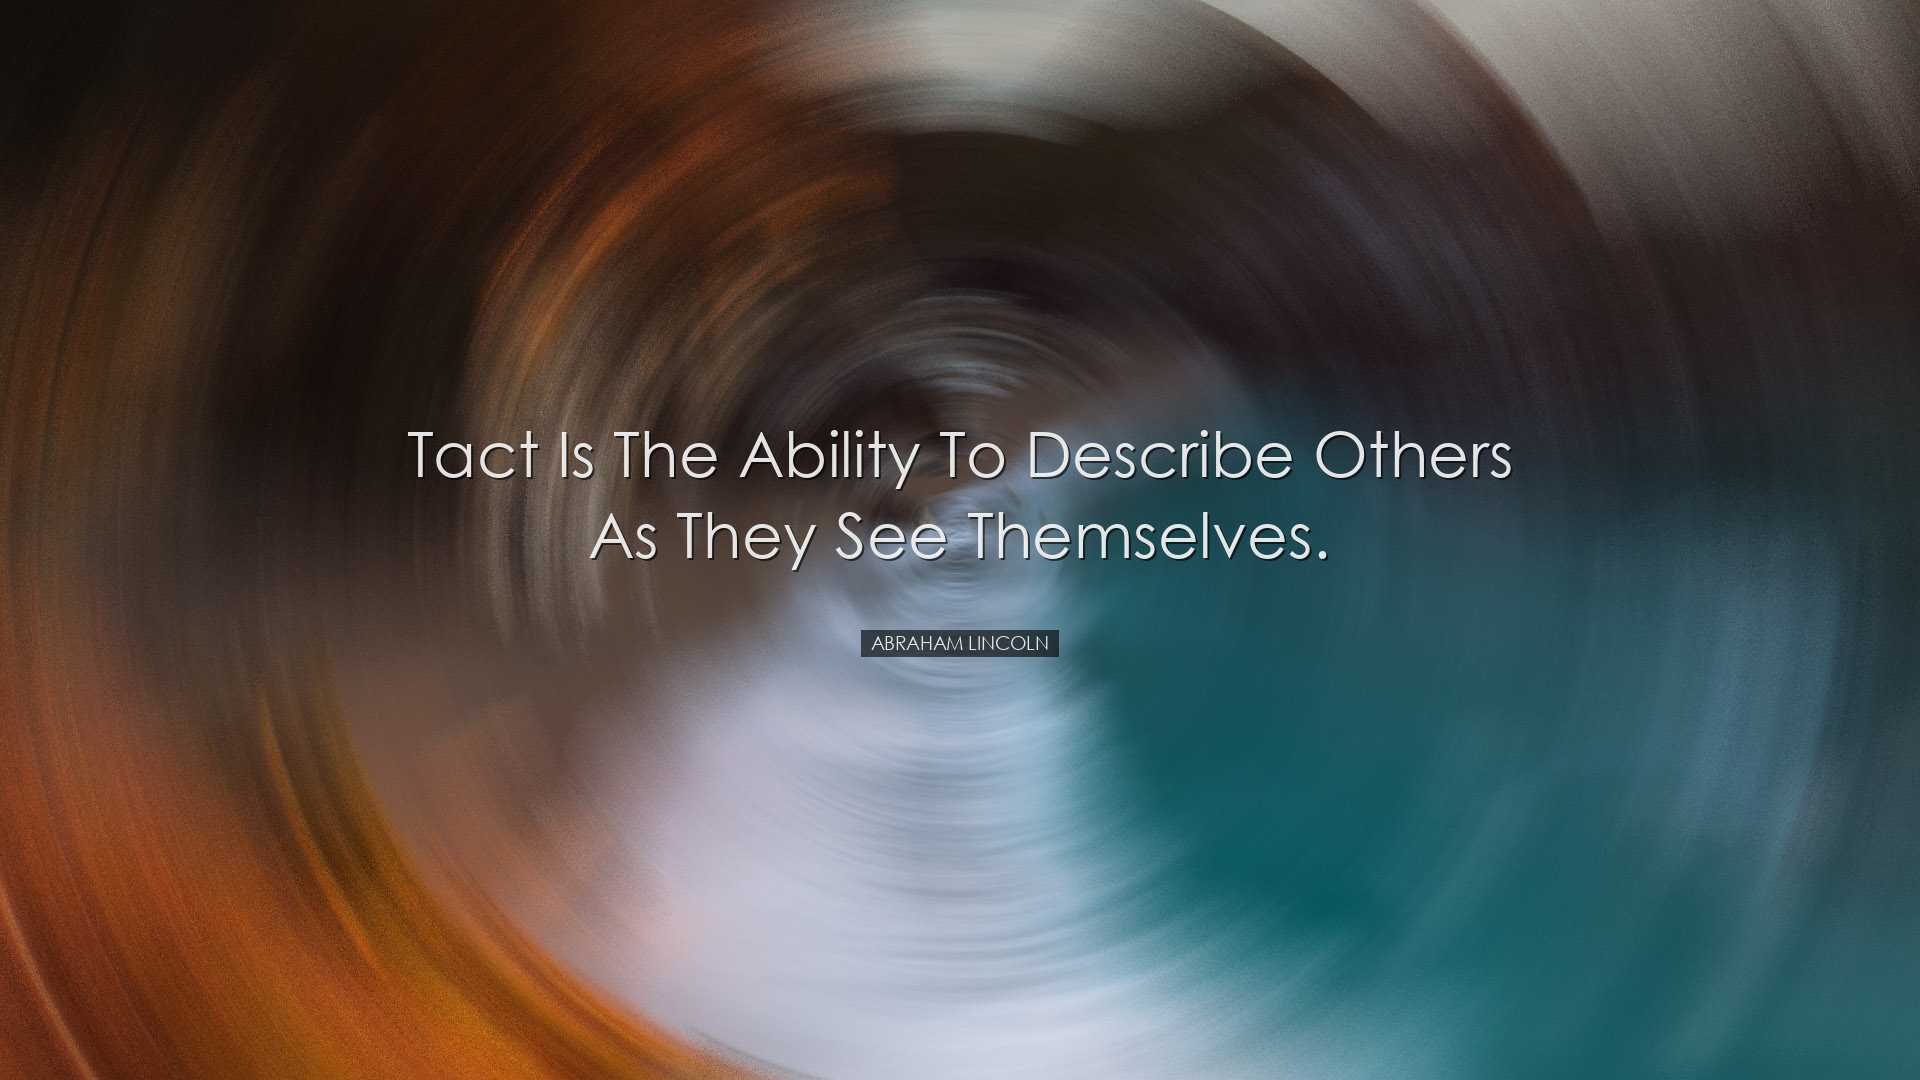 Tact is the ability to describe others as they see themselves. - A